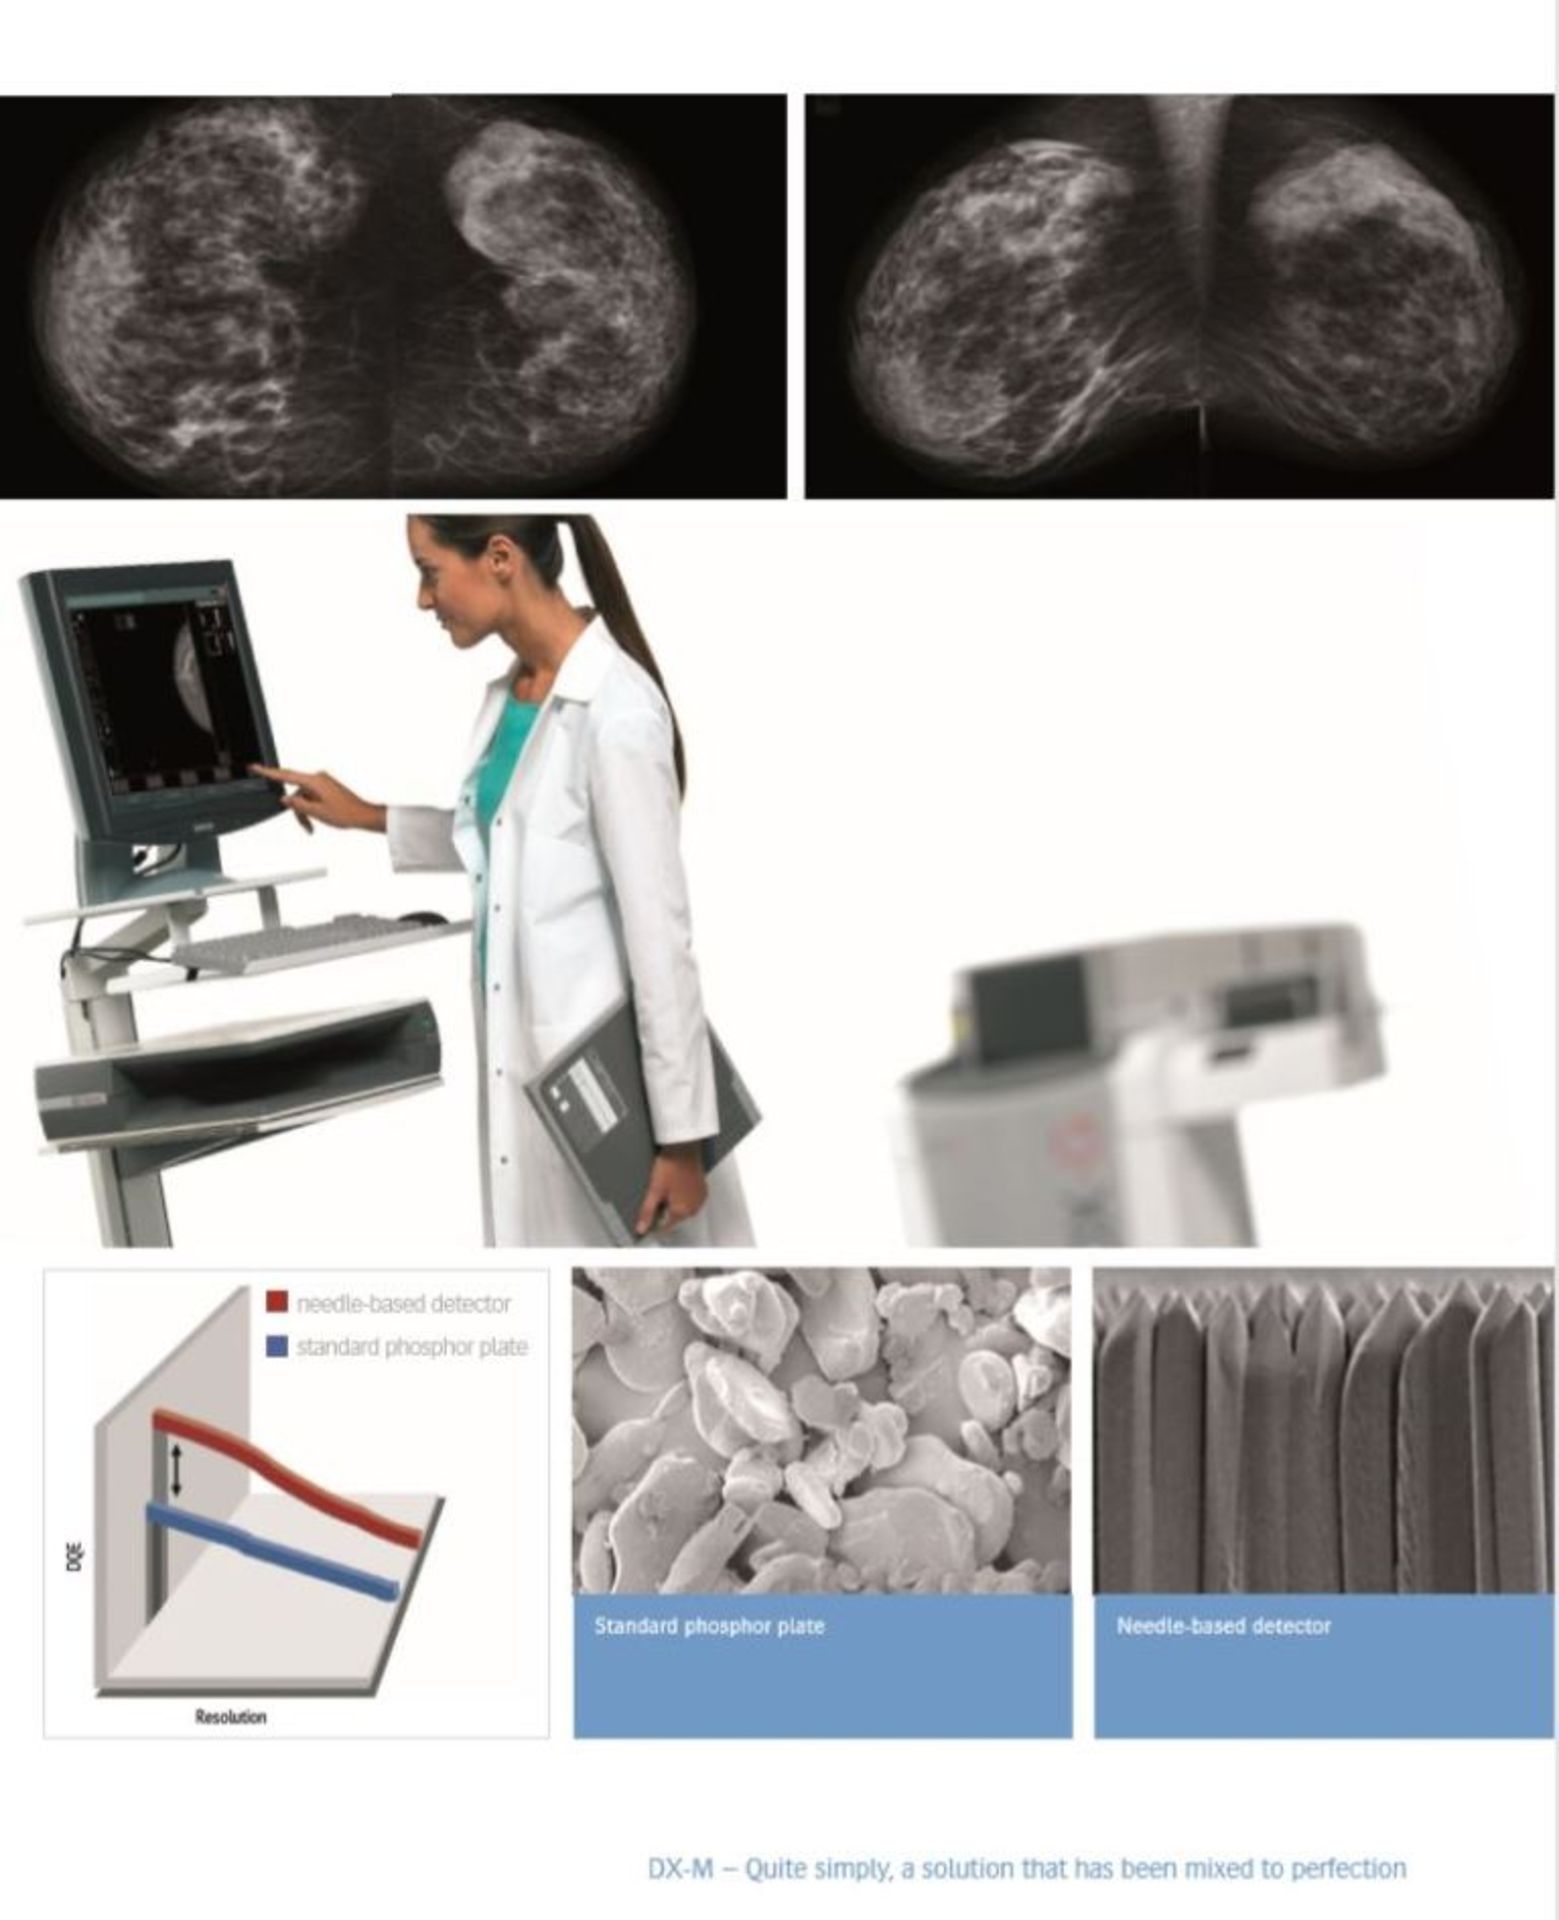 LOCATED AT MELTHAM - Agfa HealthCareâ€™s DX-M CR (Computed Radiography) 20% BUYERS PREMIUM APPLIES - Image 11 of 16